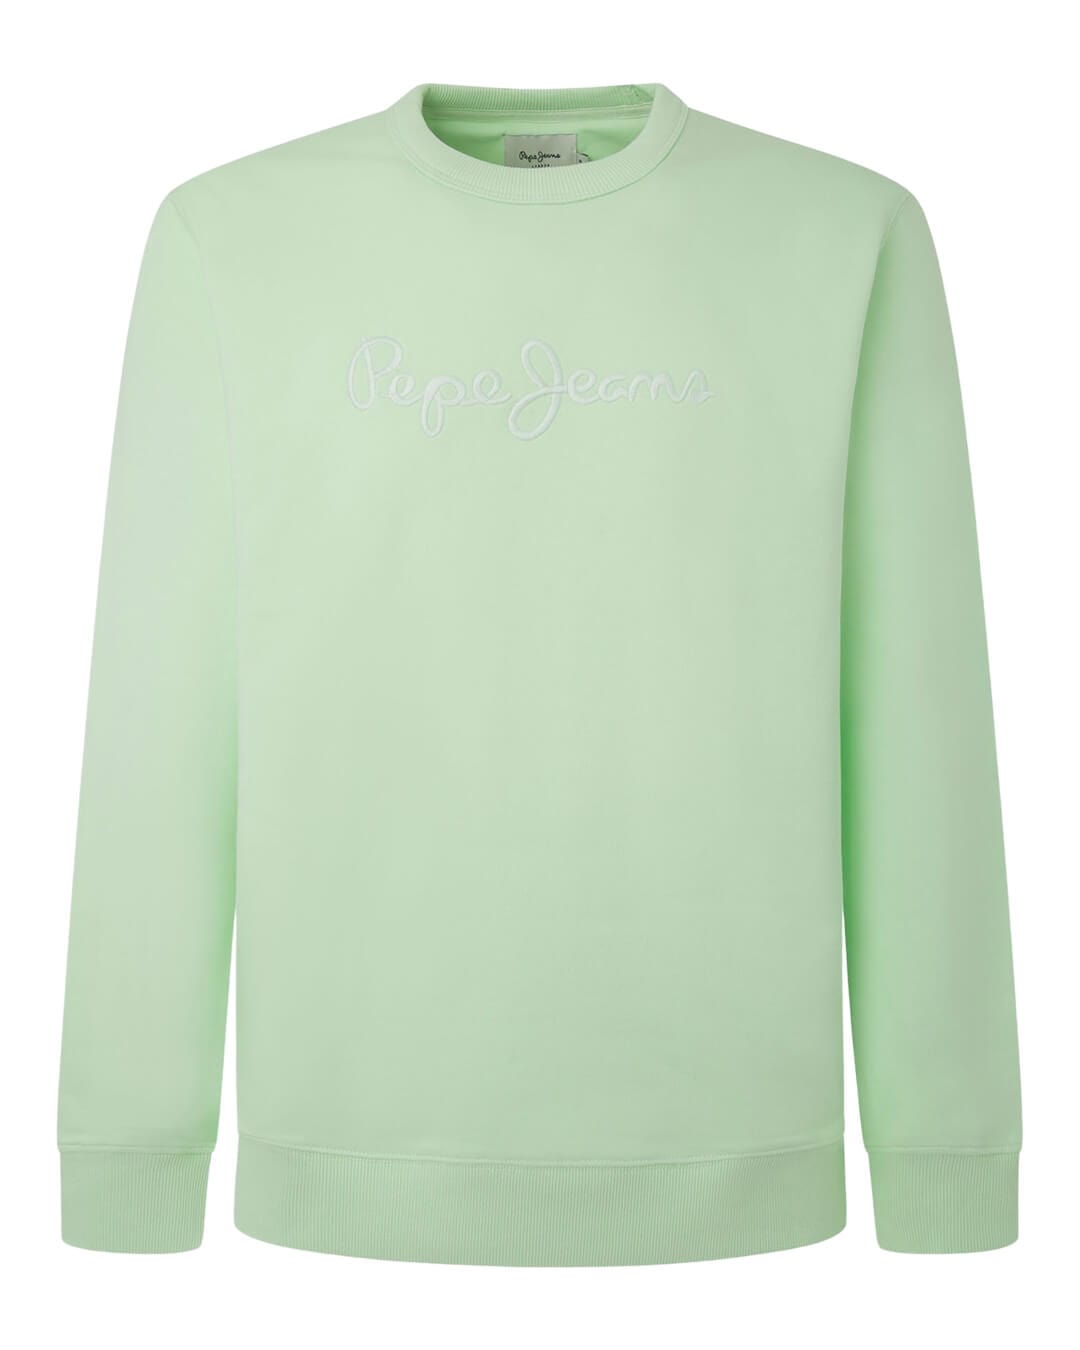 Pepe Jeans Jumpers Pepe Jeans Green Crewneck Sweatshirt With Logo